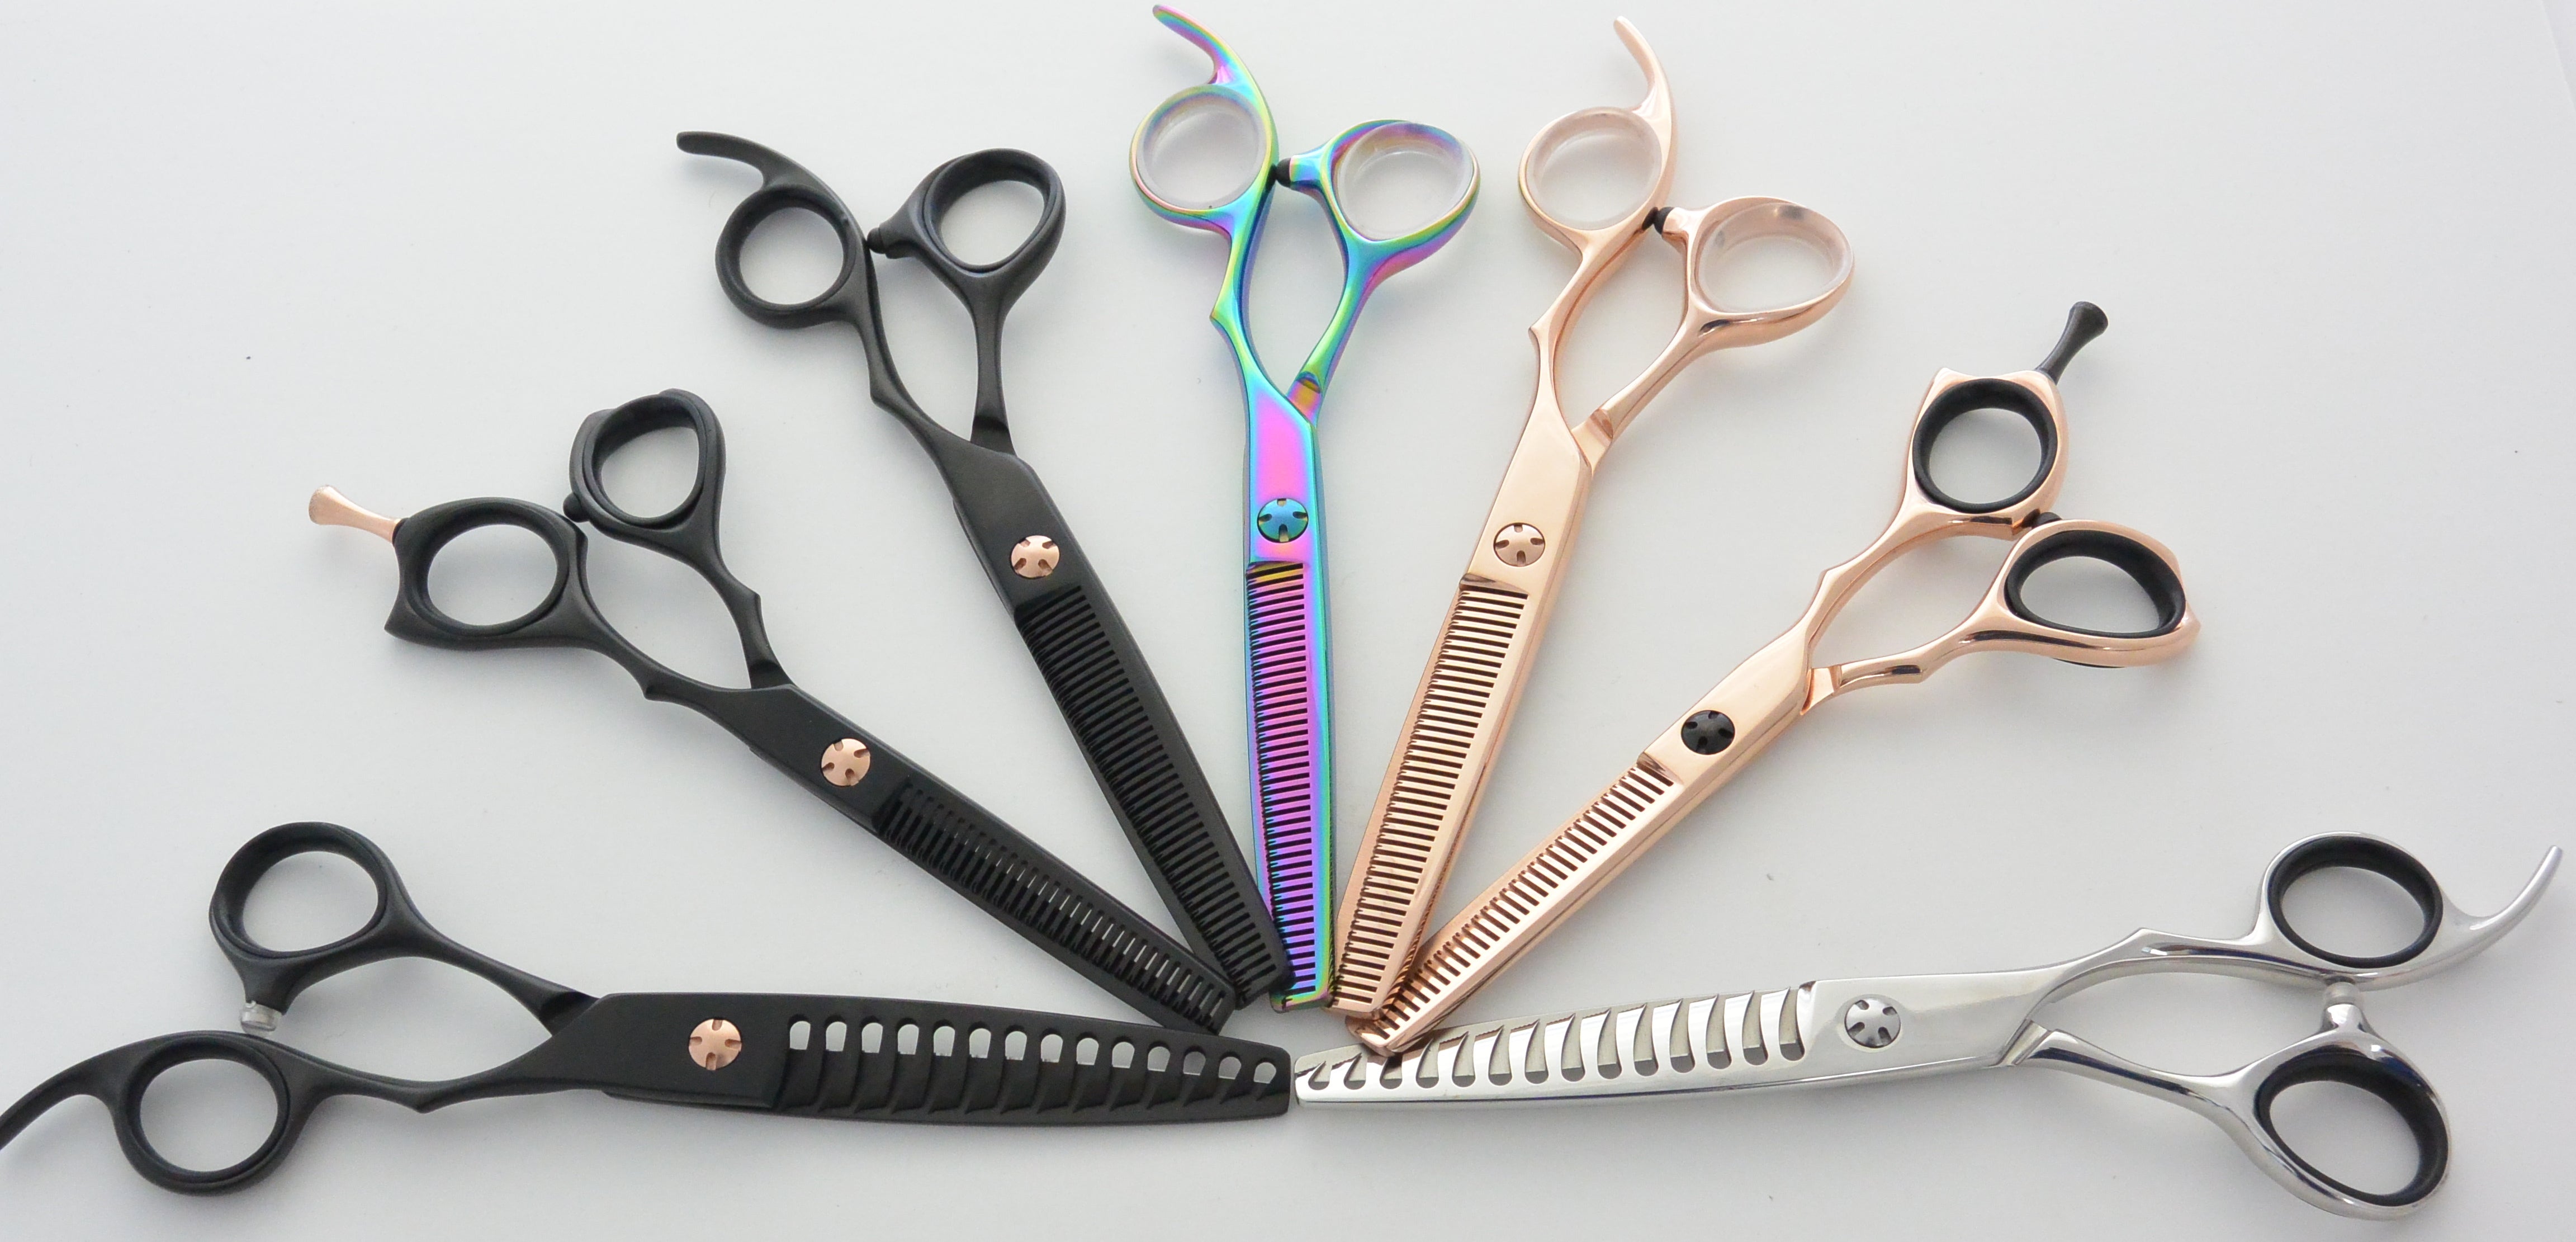 Why its good to have slide cutting shears - Scissor Tech USA